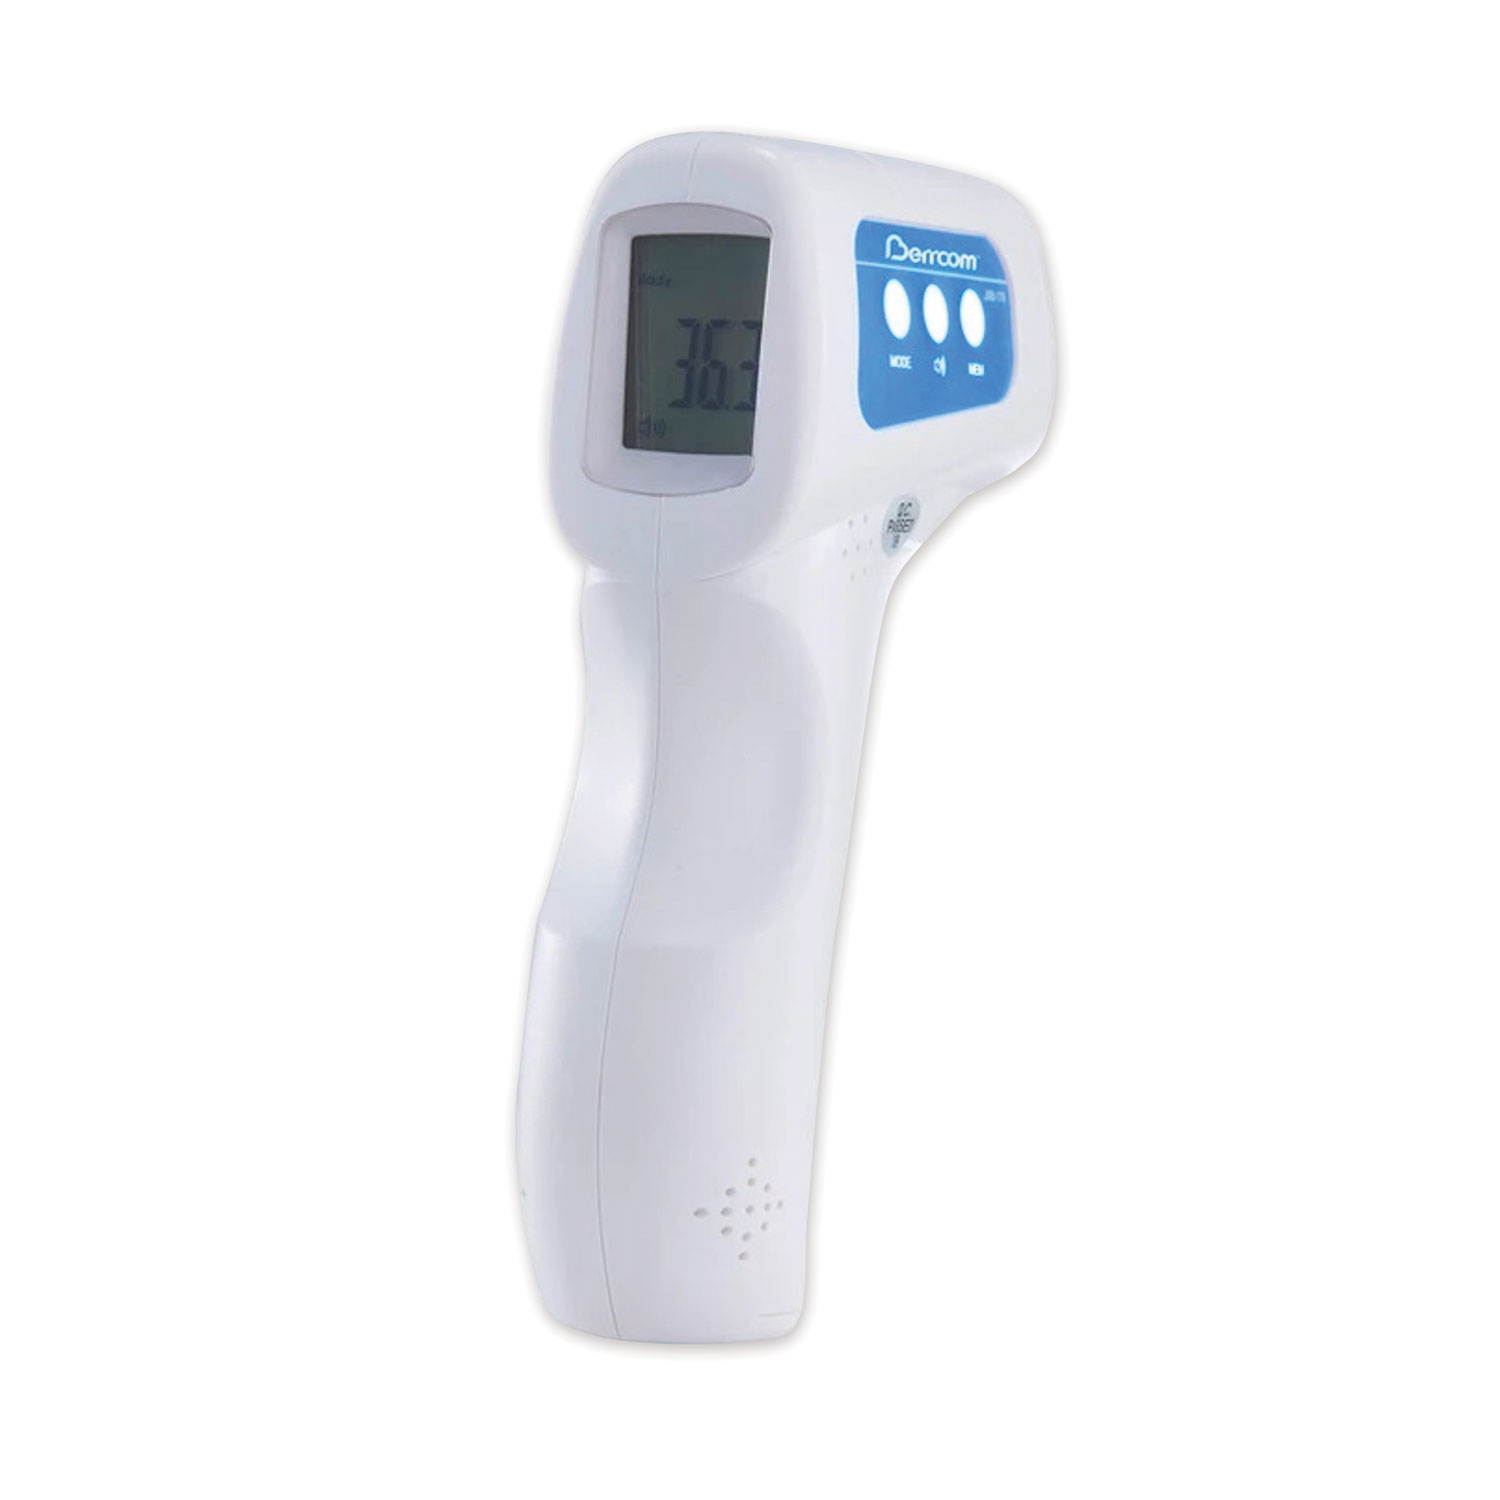  TEH TUNG IT-0808 Infrared Handheld Thermometer, Digital, 50/Carton (GN1IT0808) 